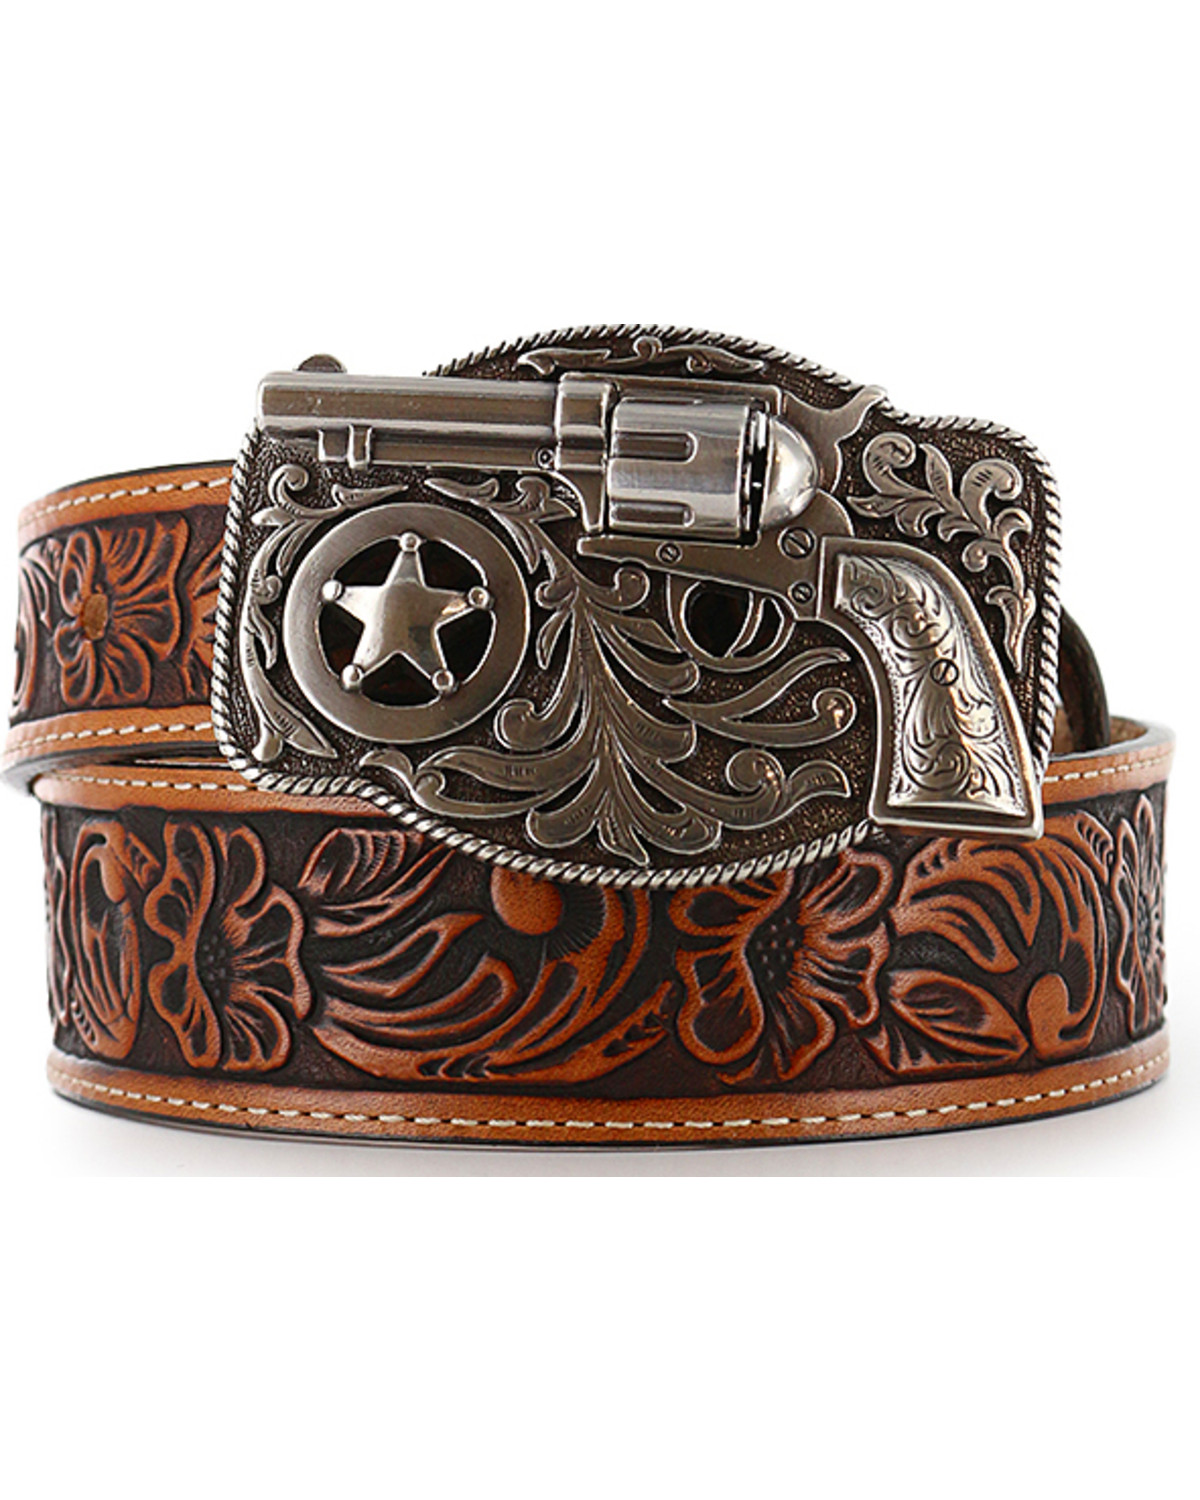 JUSTIN Belt Brown Tooled Leather Western REVOLVER Gun Buckle USA Youth 18 $49 